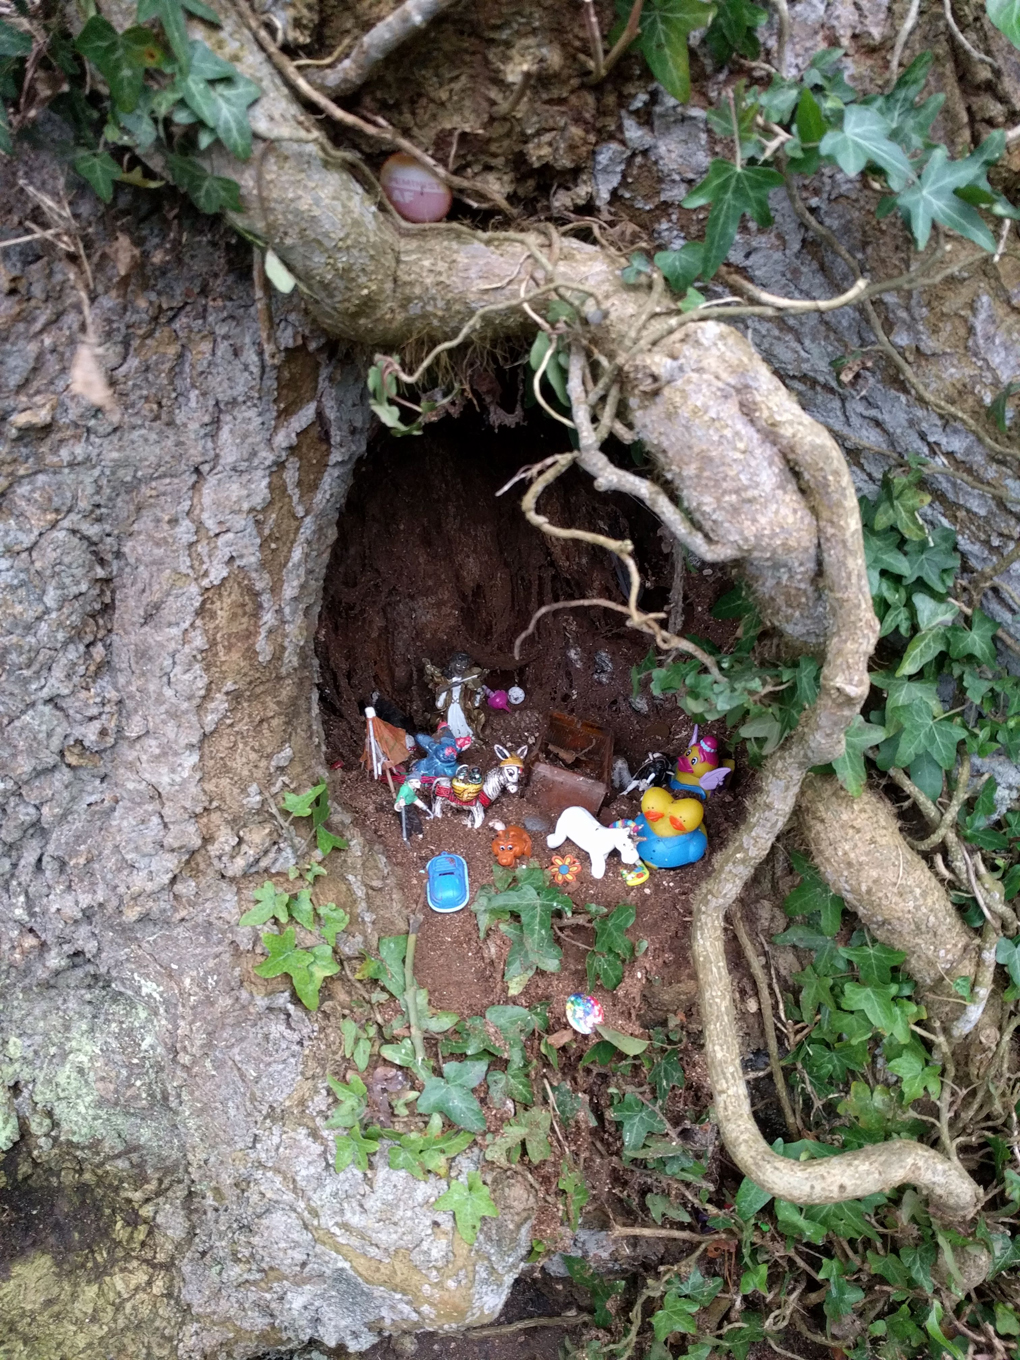 A fairy grotto in the base of a tree.